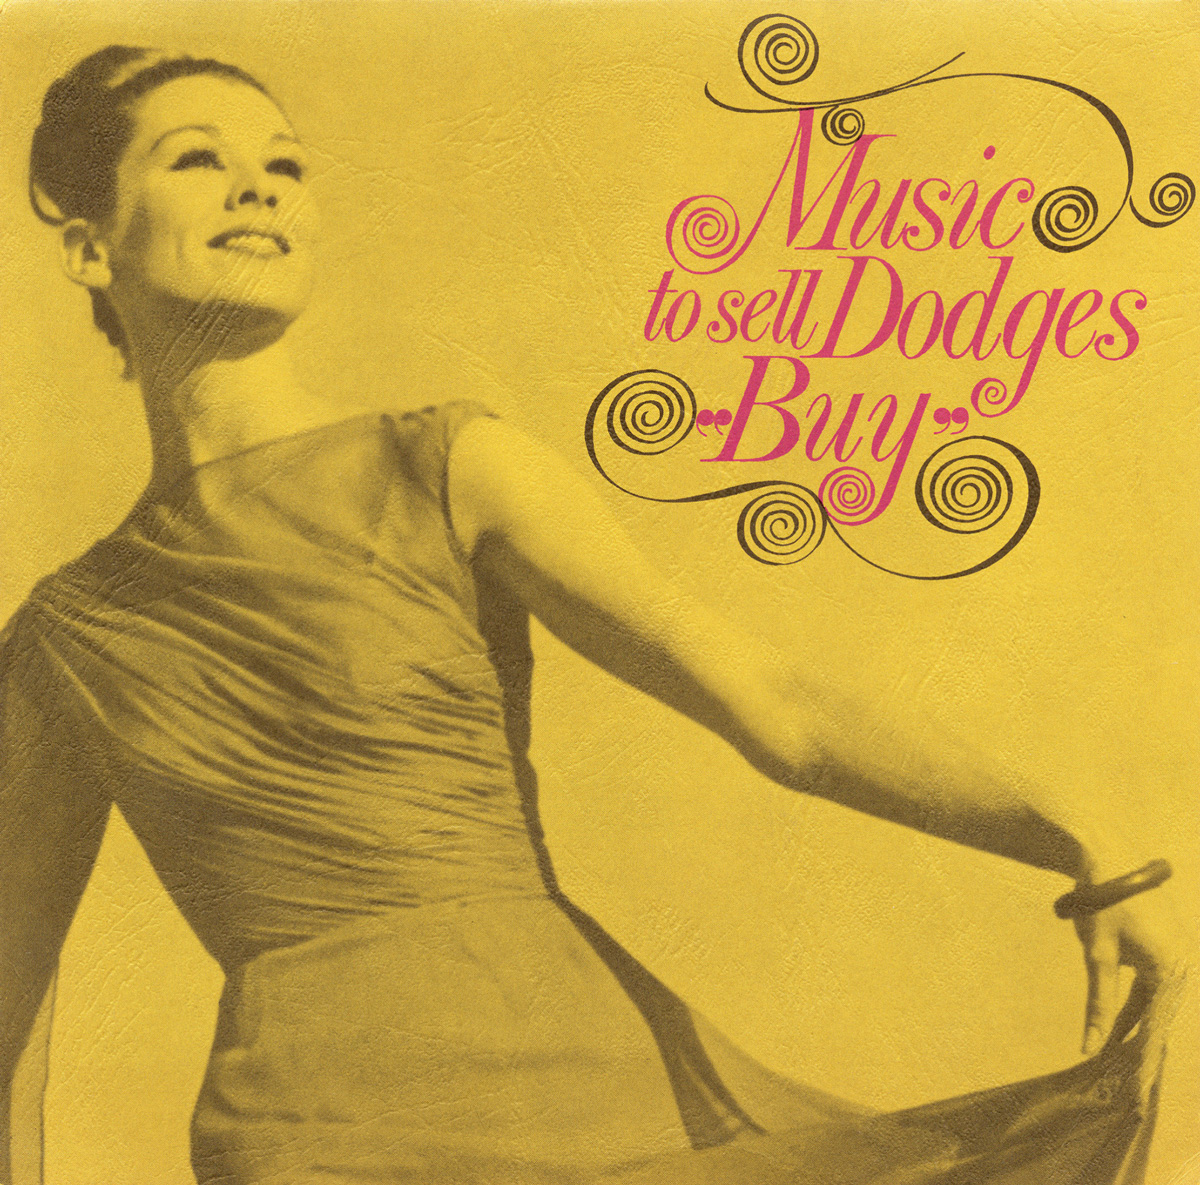 An album cover from 1964 for a Dodge announcement show titled “Music to Sell Dodges Buy.”